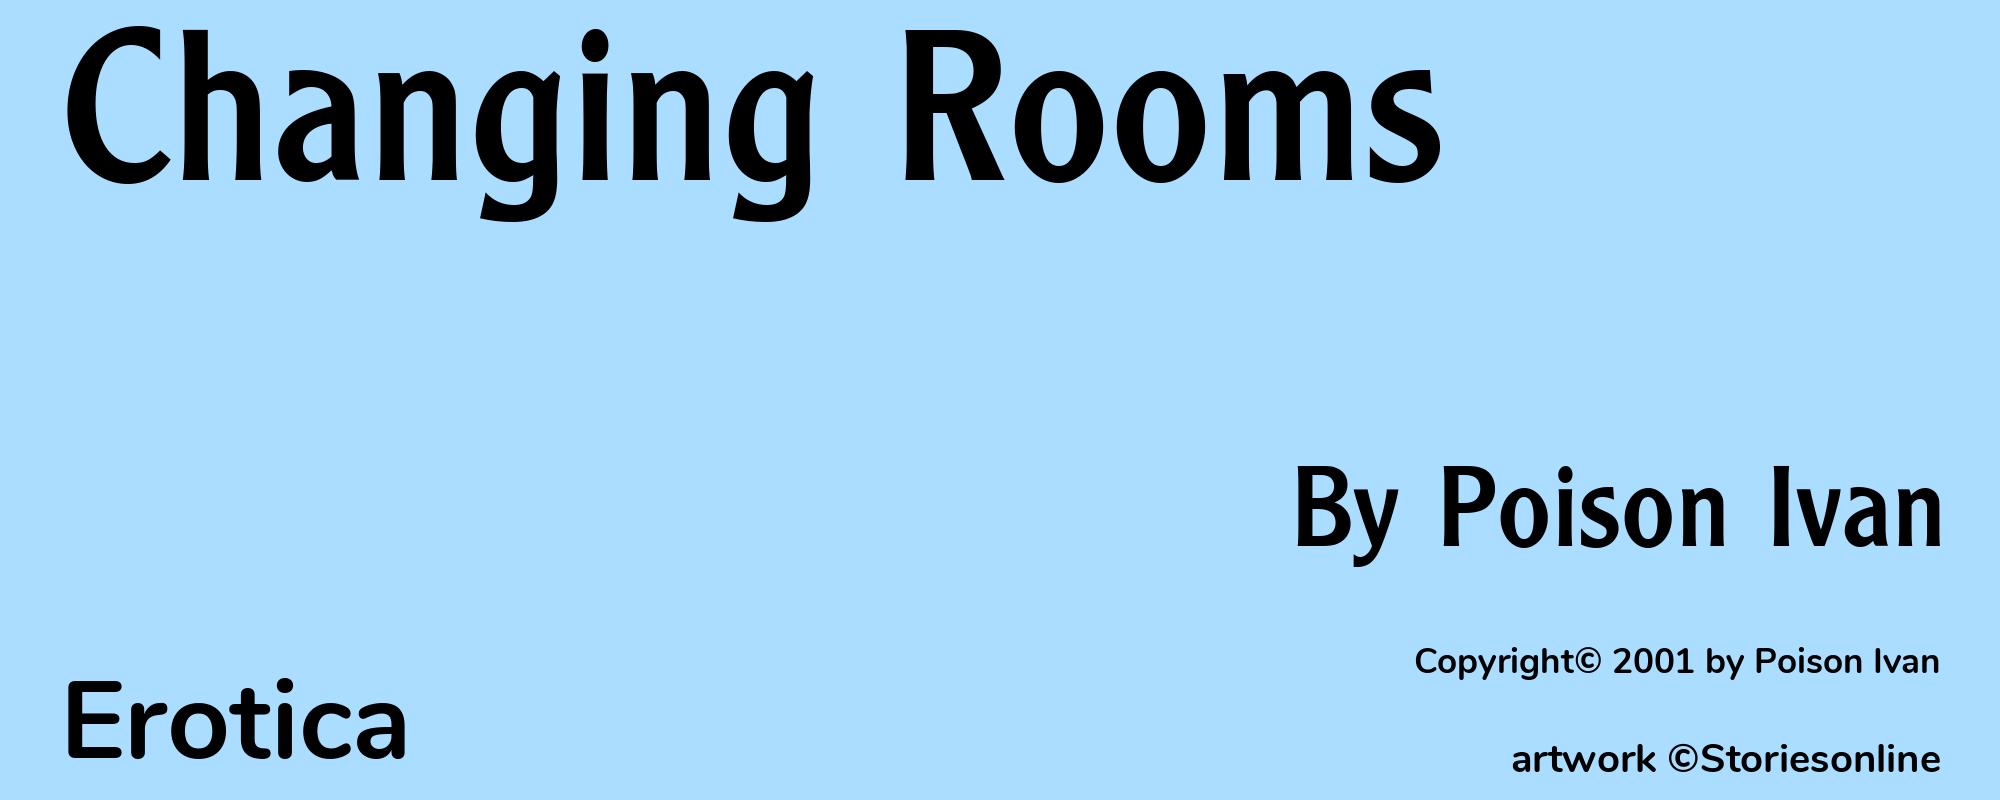 Changing Rooms - Cover